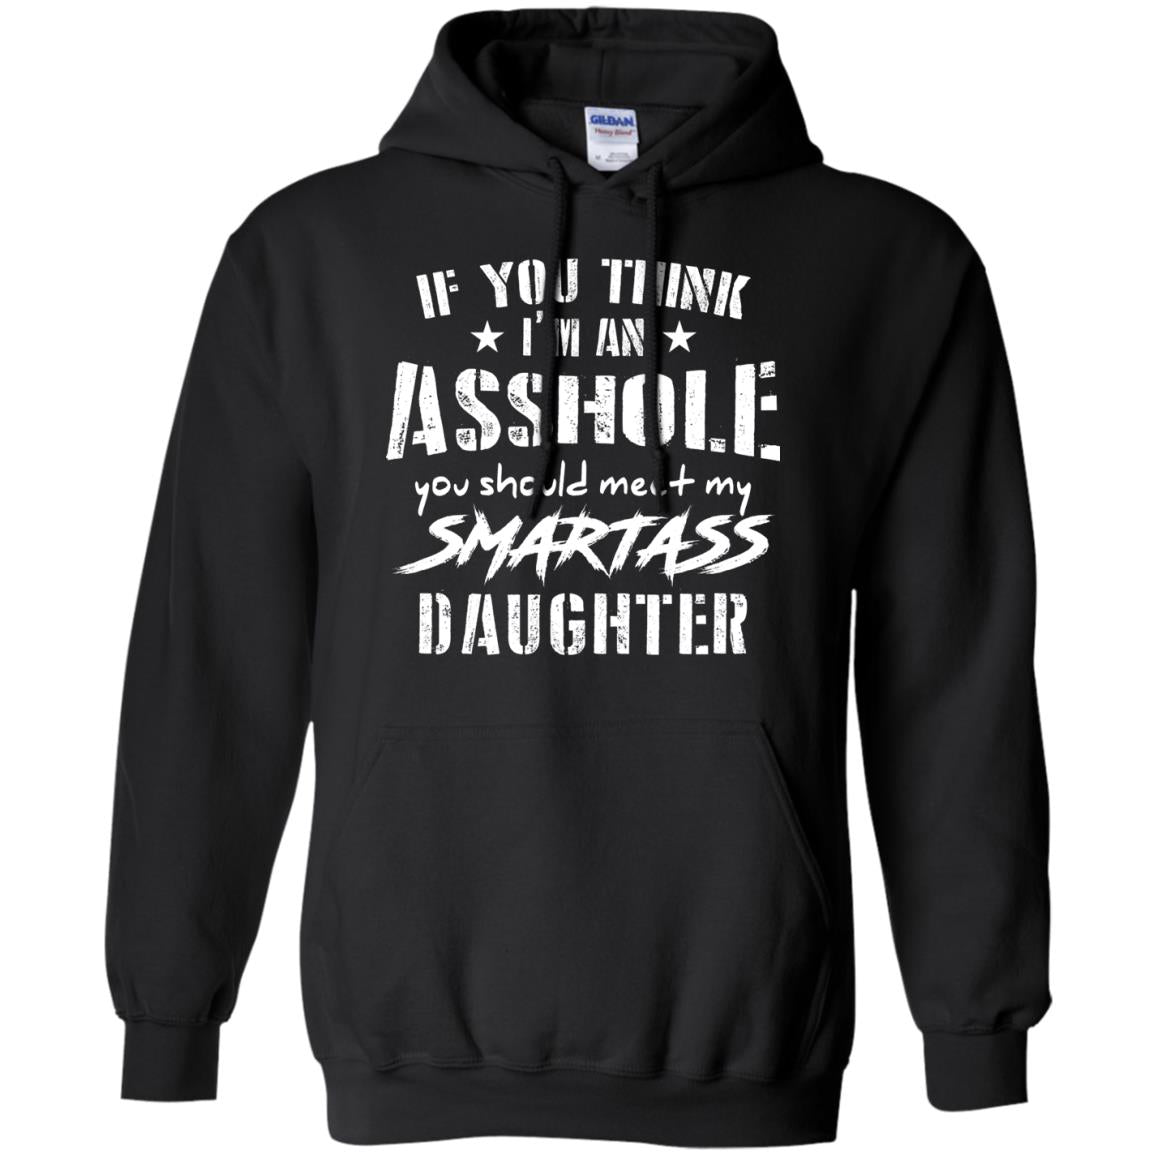 You Should Meet My Daughter Daddy T-shirt